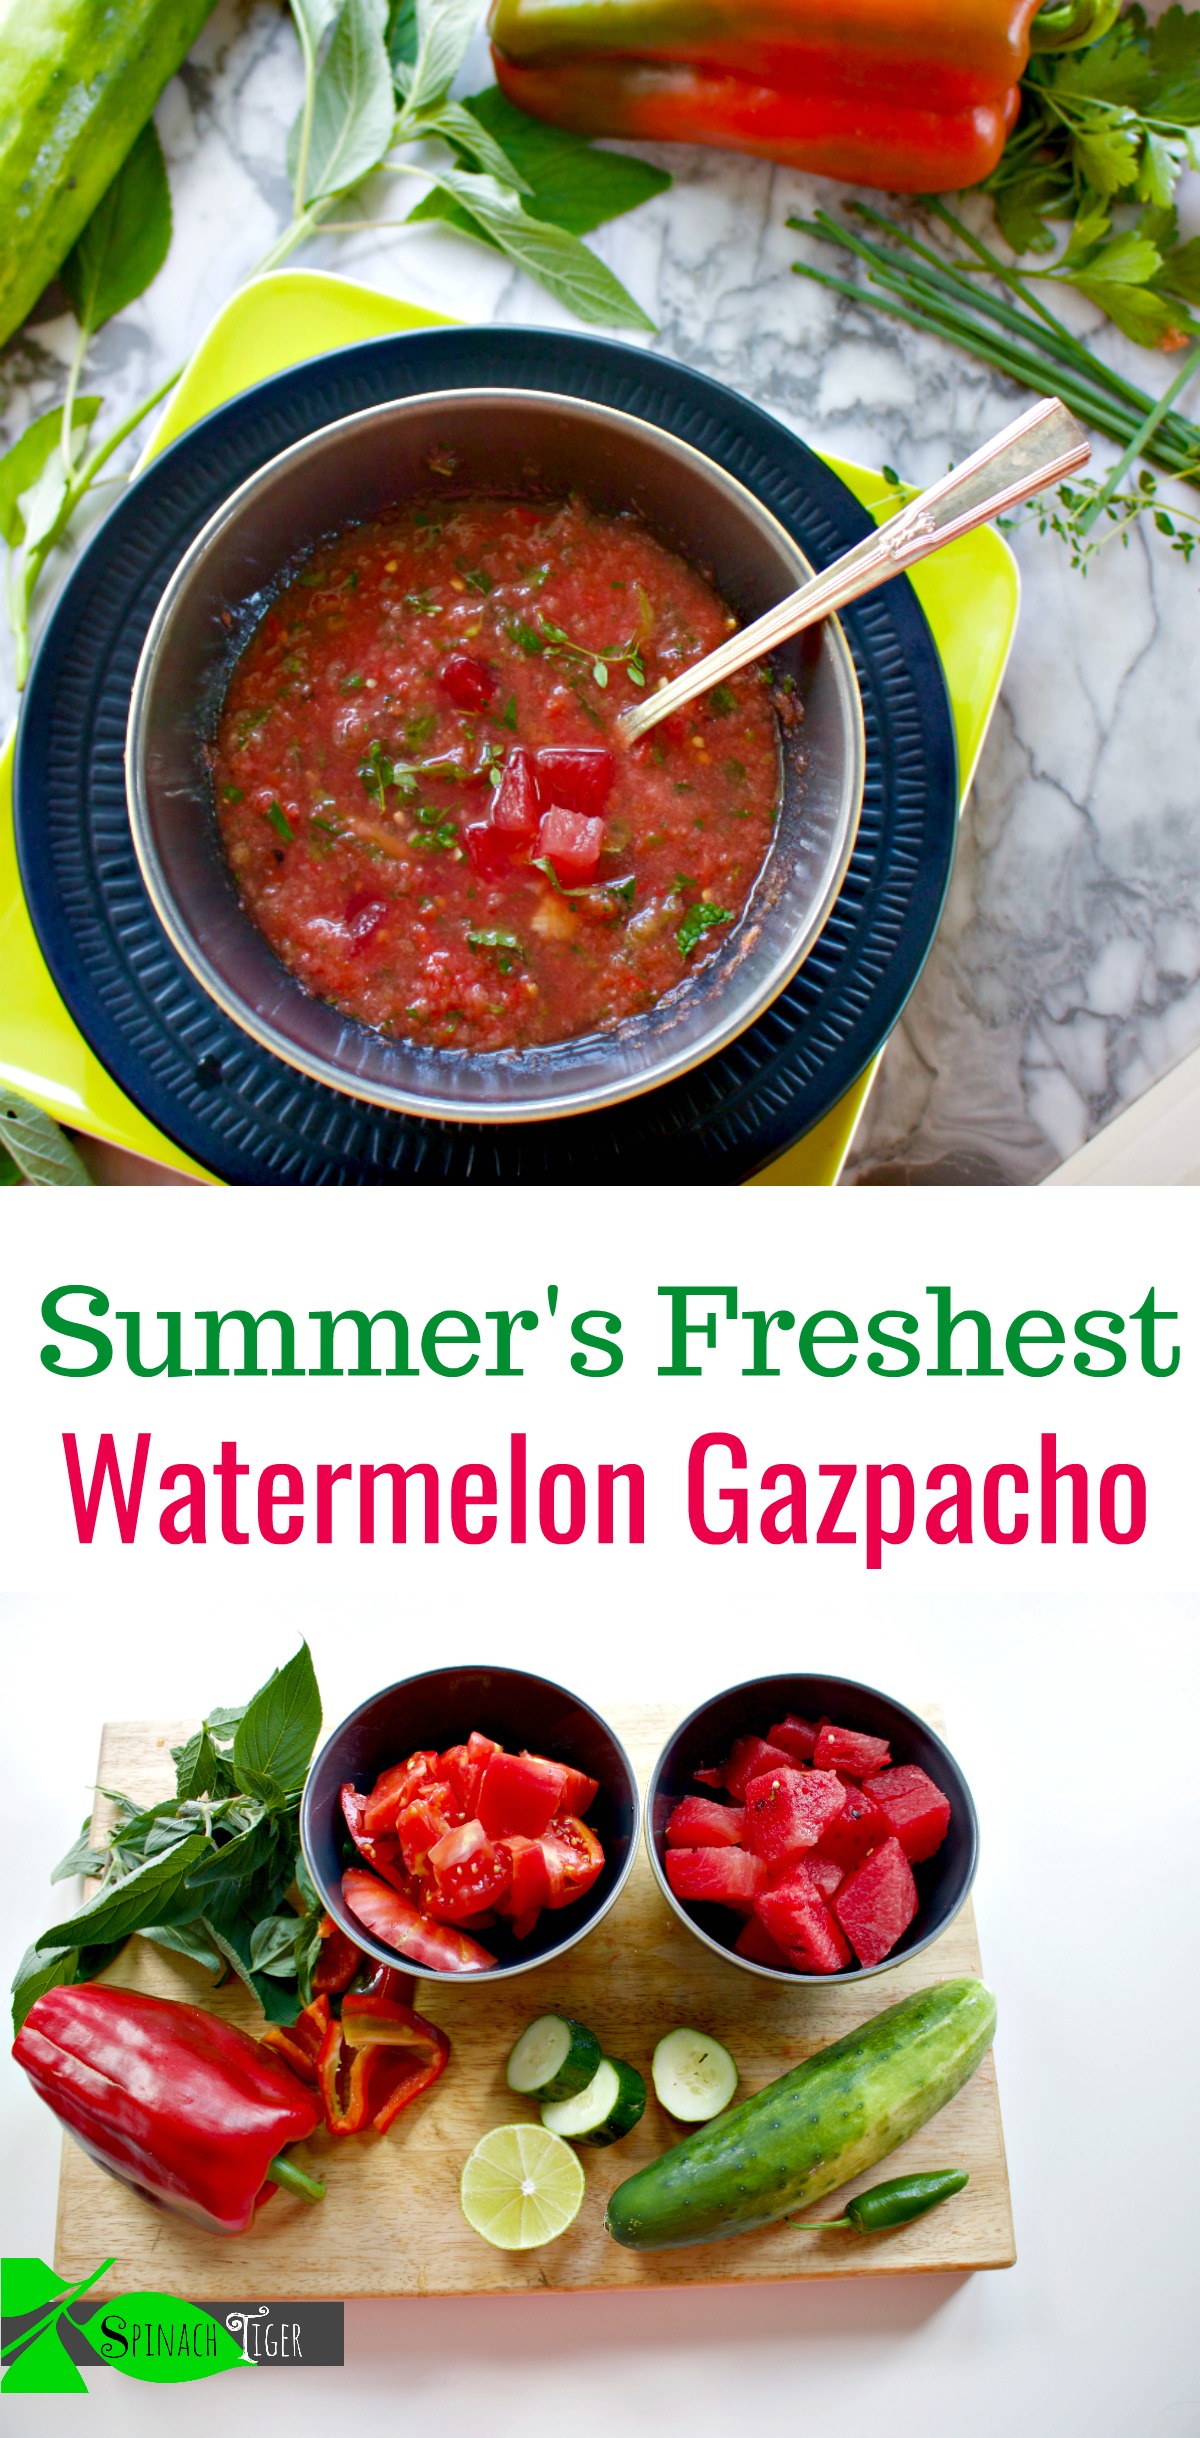 Recipe for Watermelon Gazpacho from Spinach Tiger